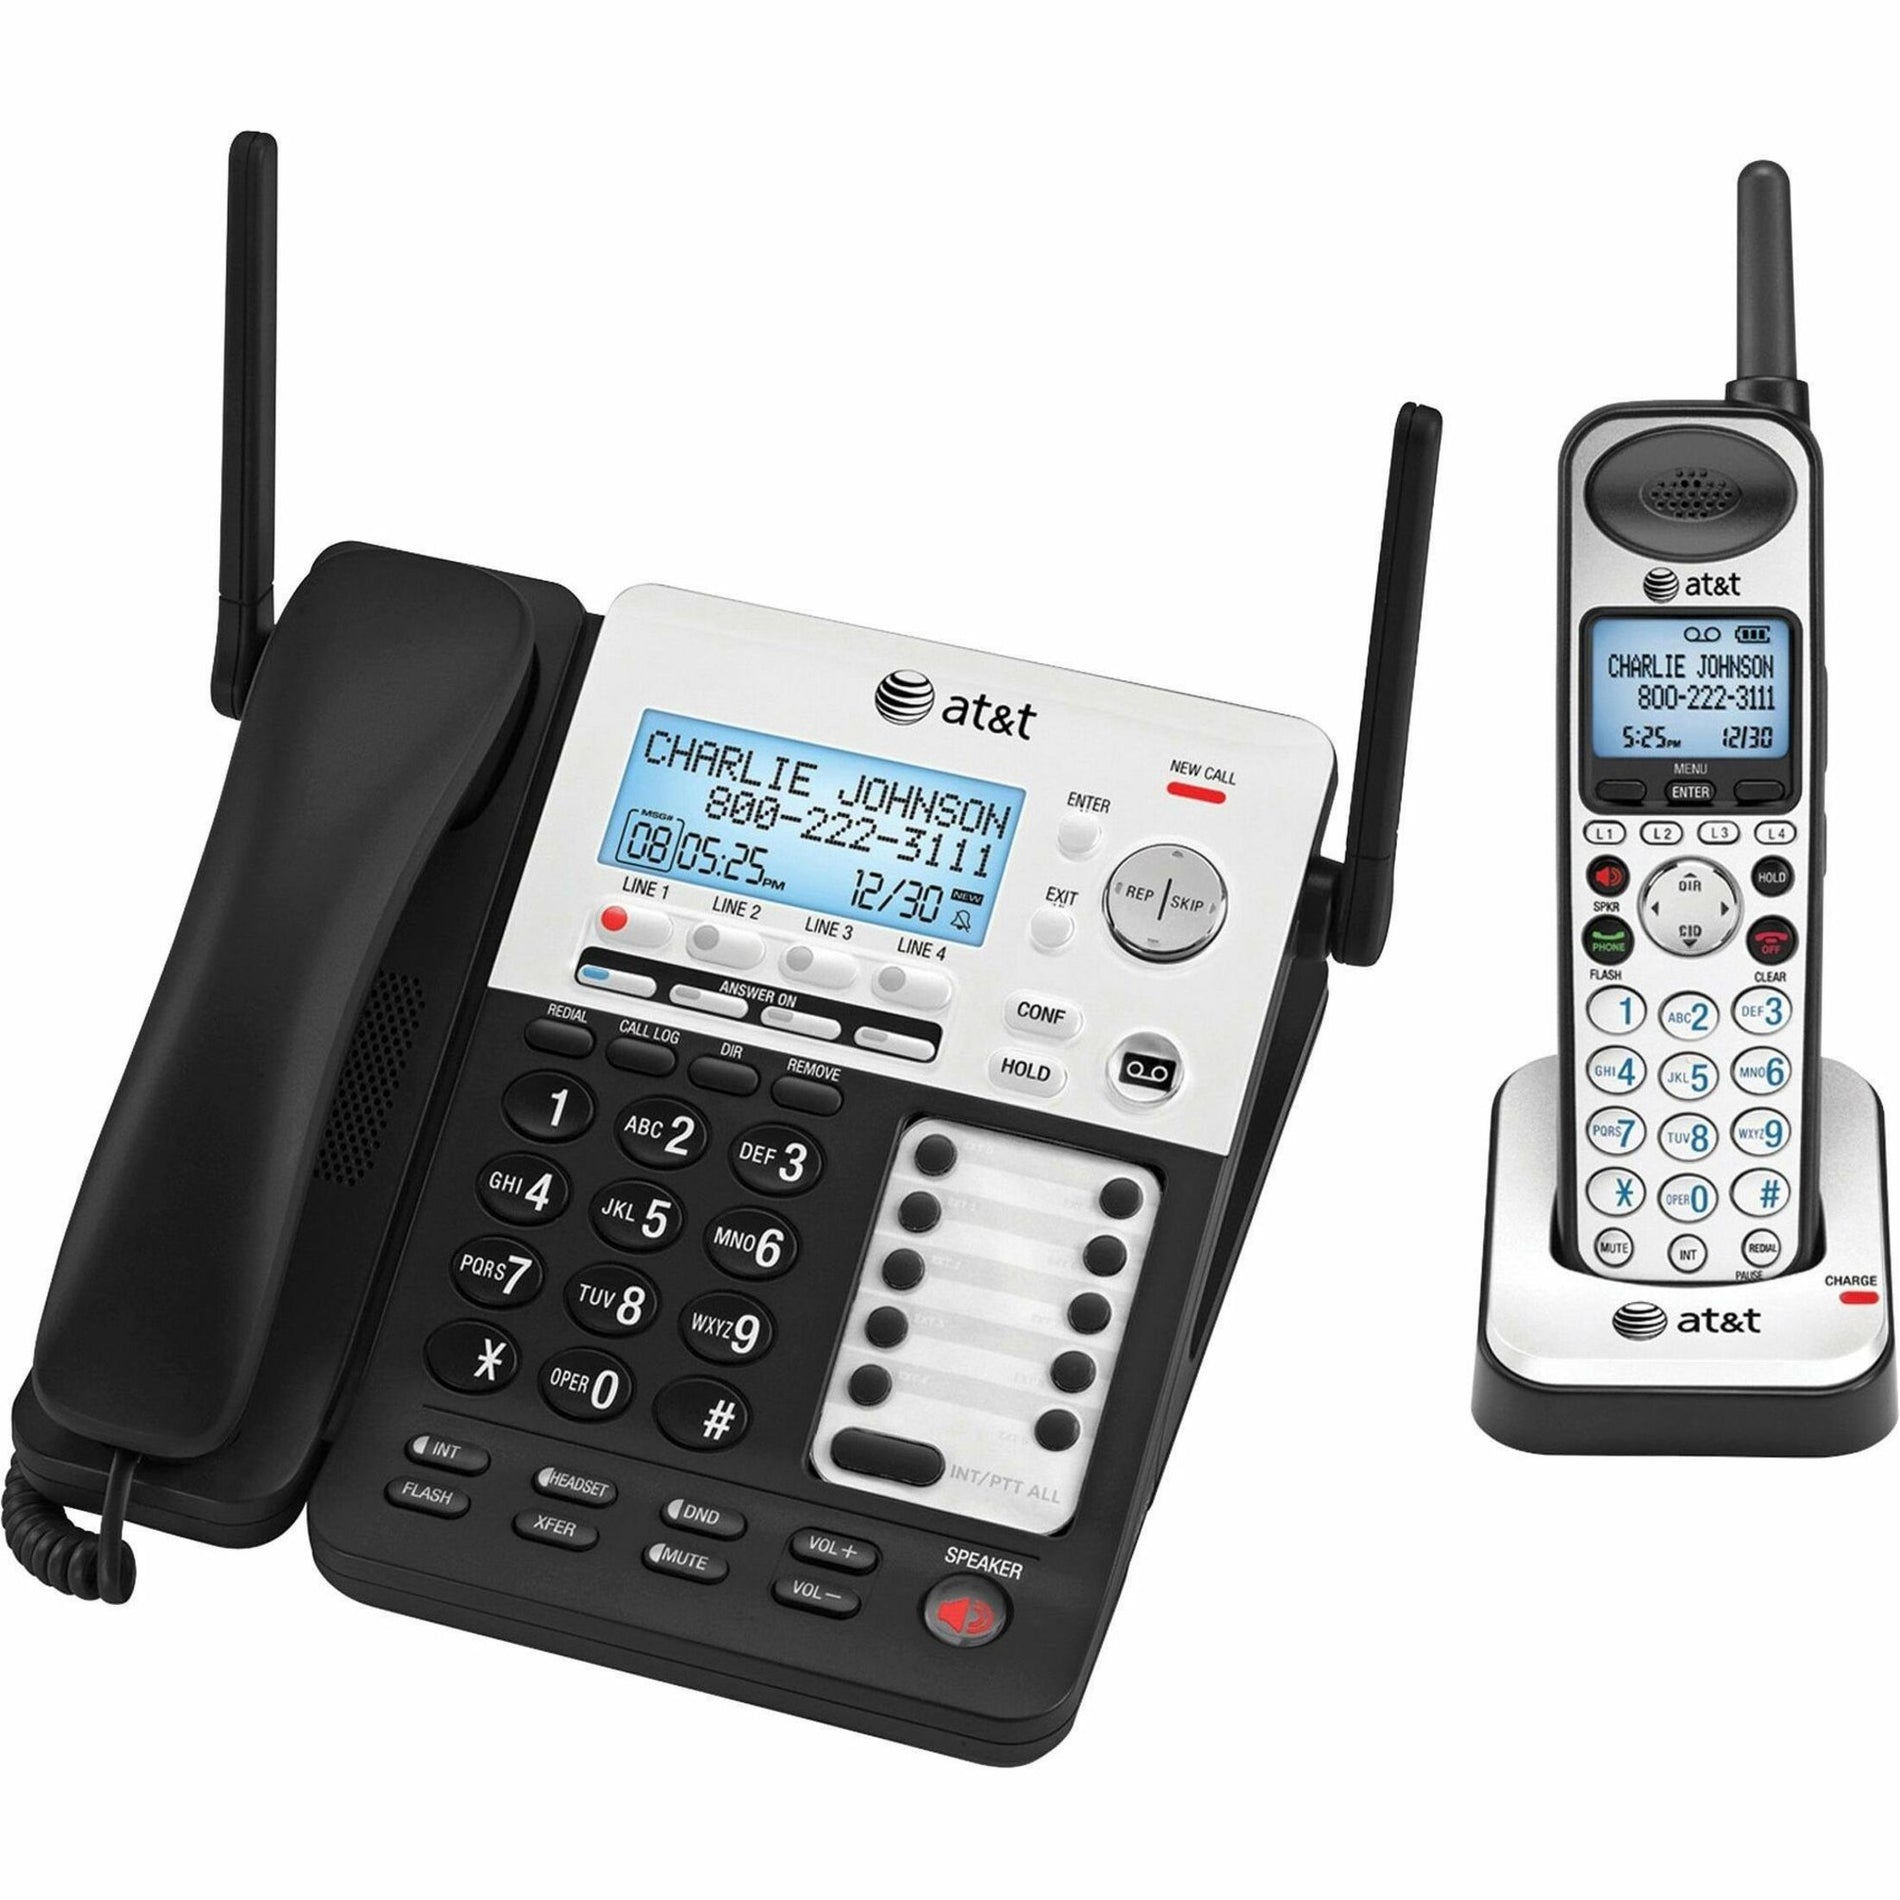 AT&T SB67138 SynJ DECT Cordless Phone, Caller ID Memory, Speed Dial, Answering Machine